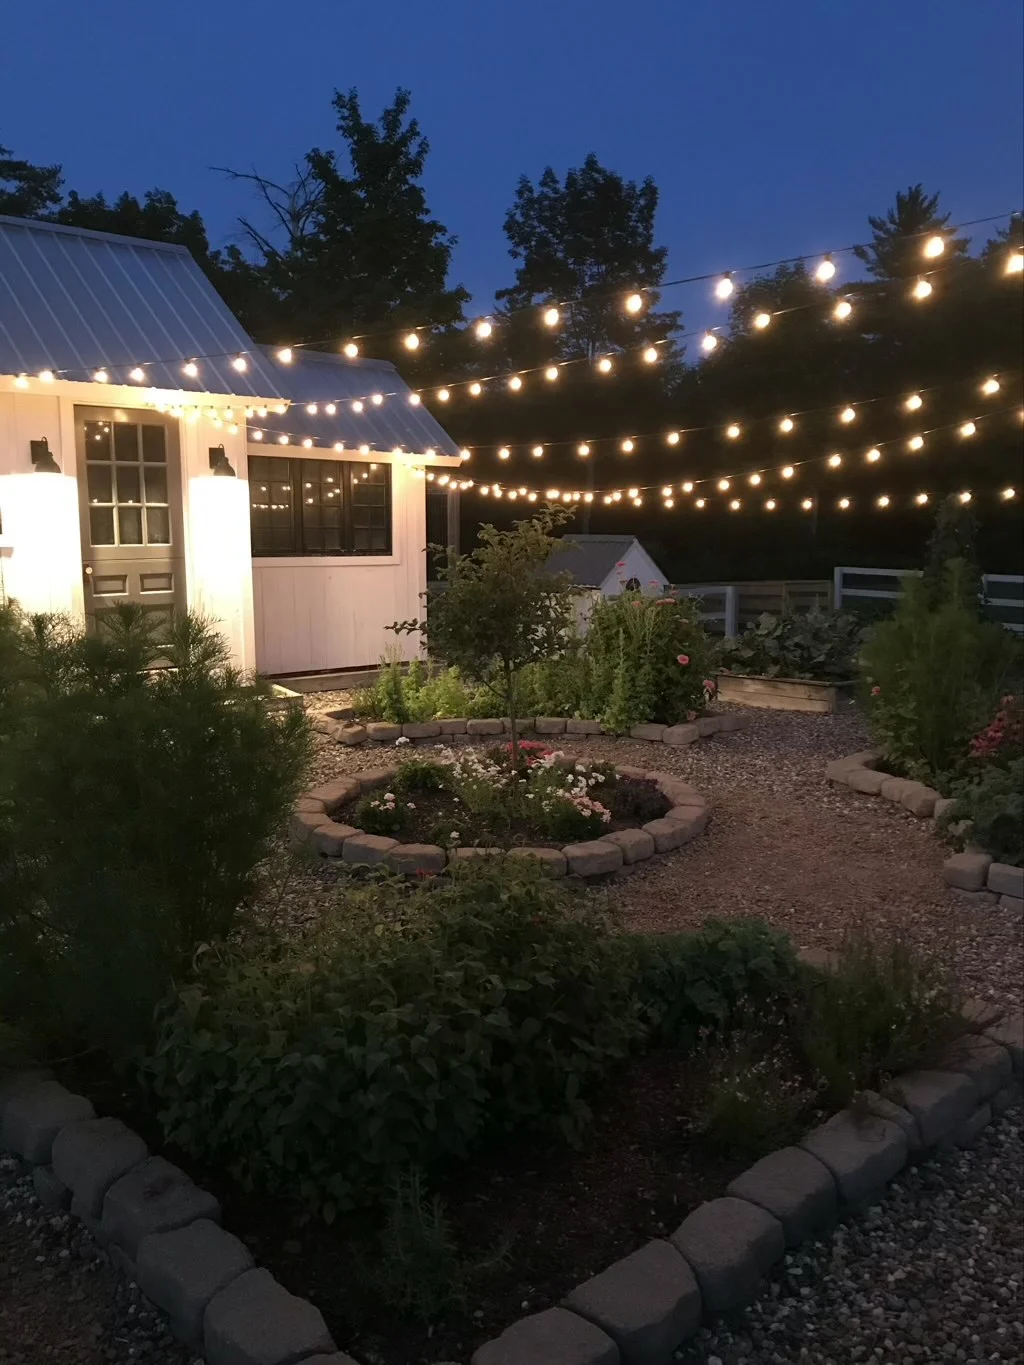 garden with lights on at night